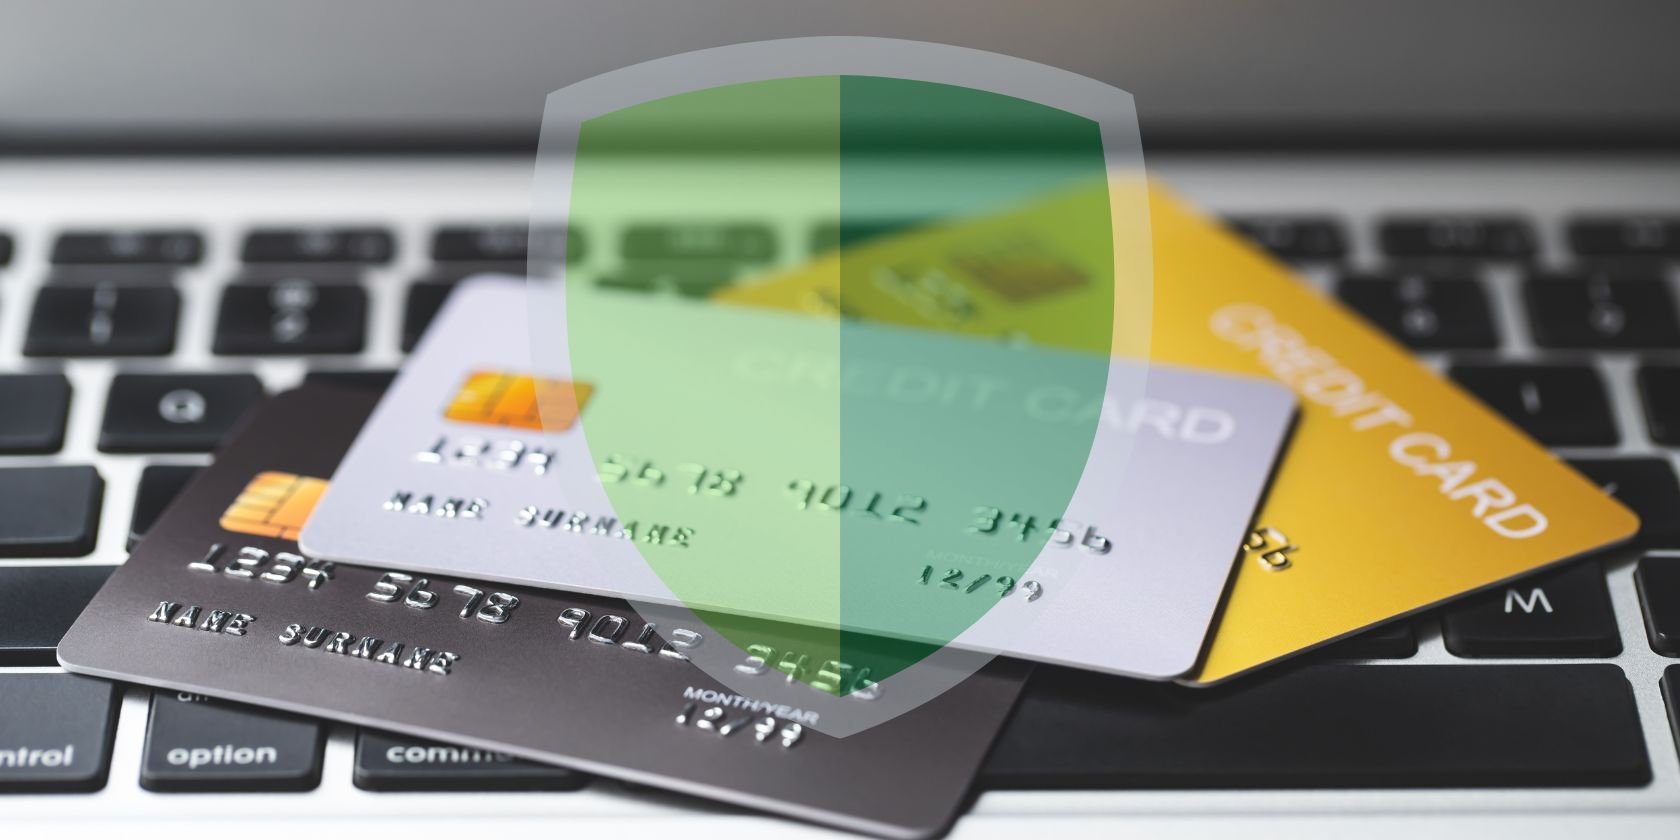 3D Secure Protects Your Online Payments: Here's How It Works